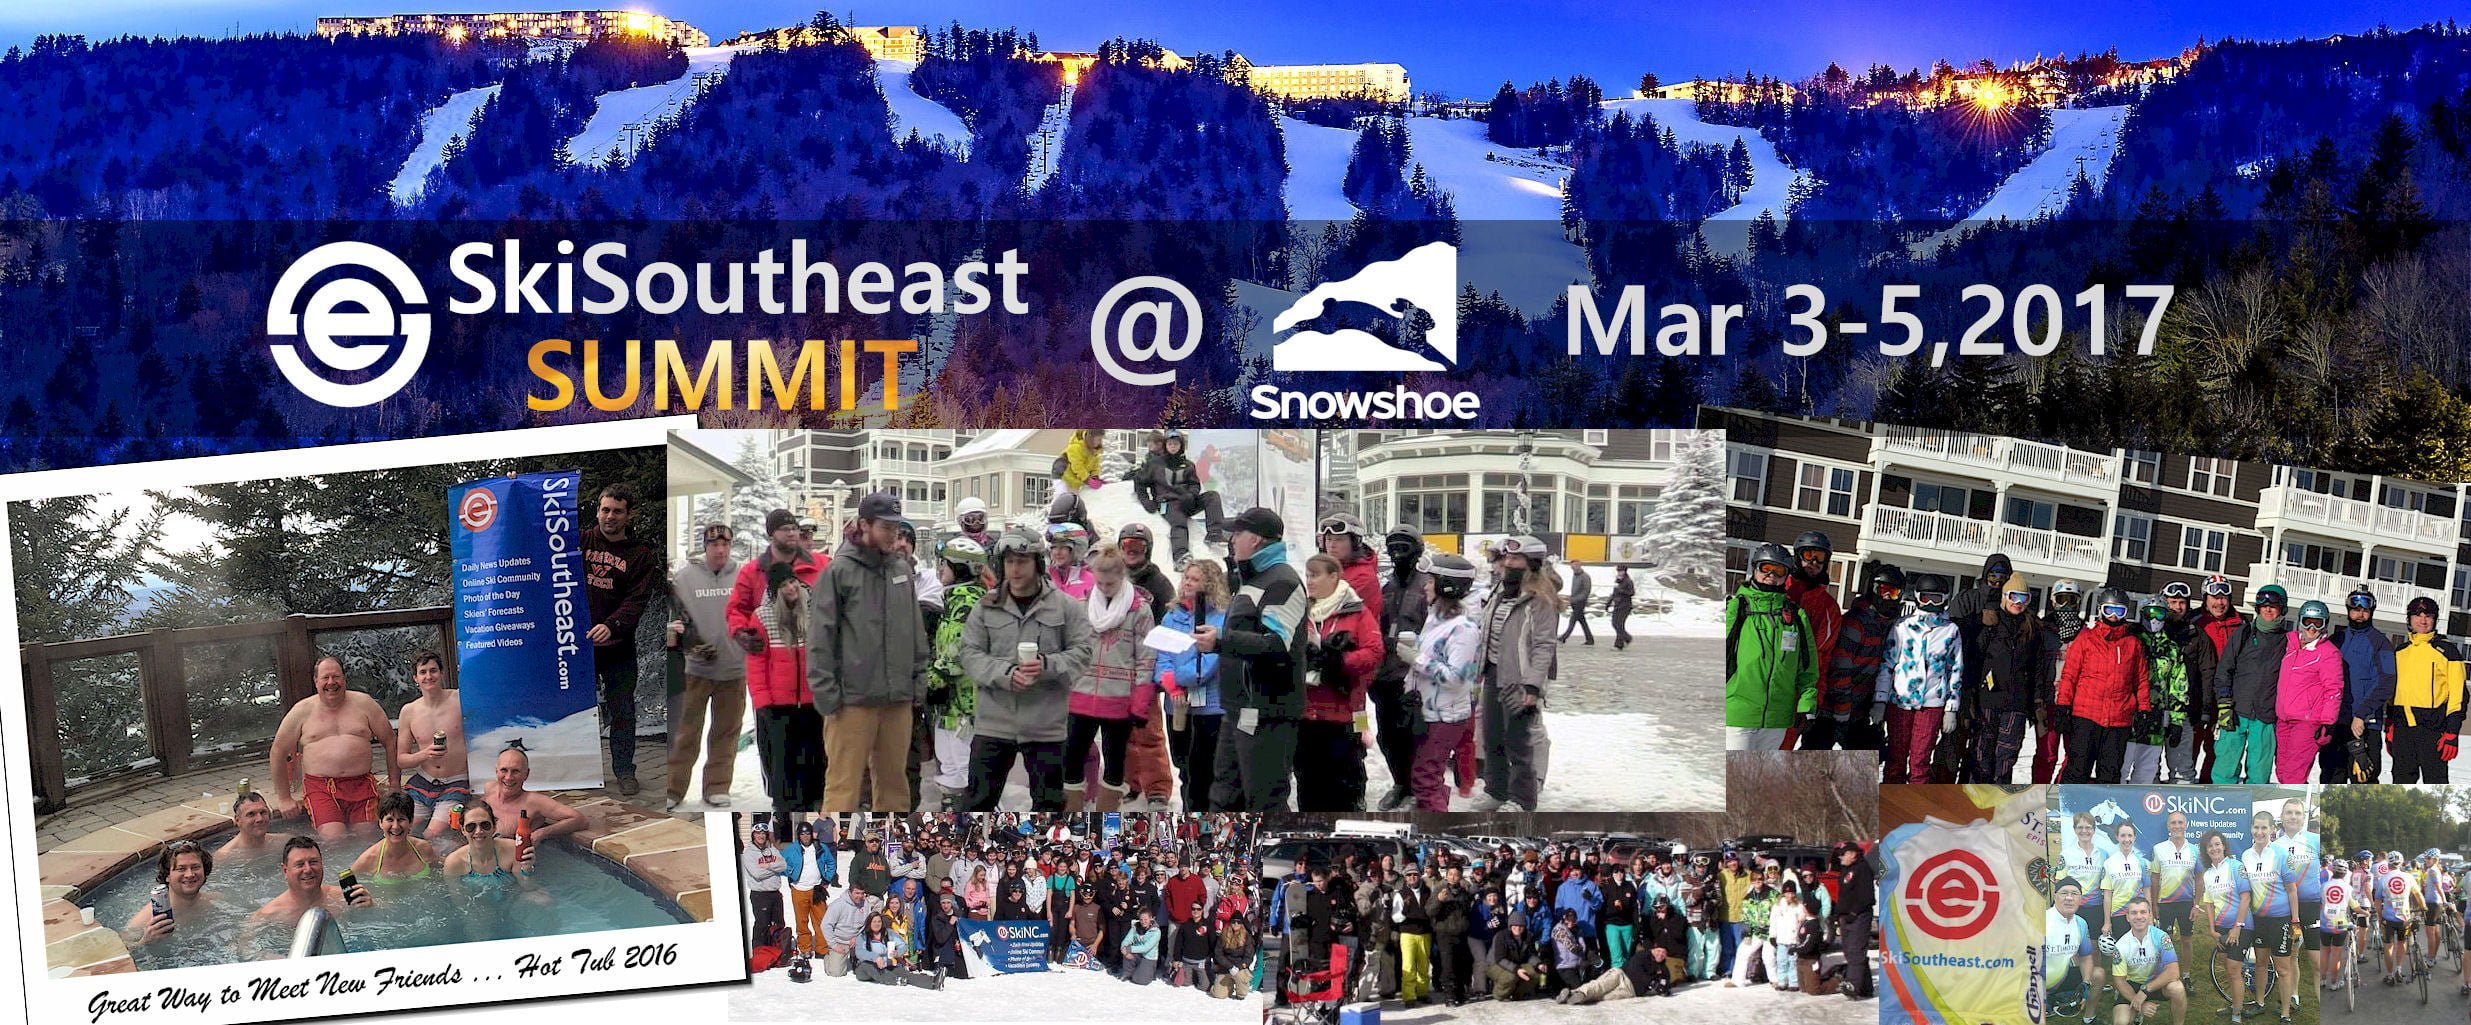 Get 20 Off Snowshoe Lodging Free Sunday Lift Tickets And A Chance To Win Season Pass